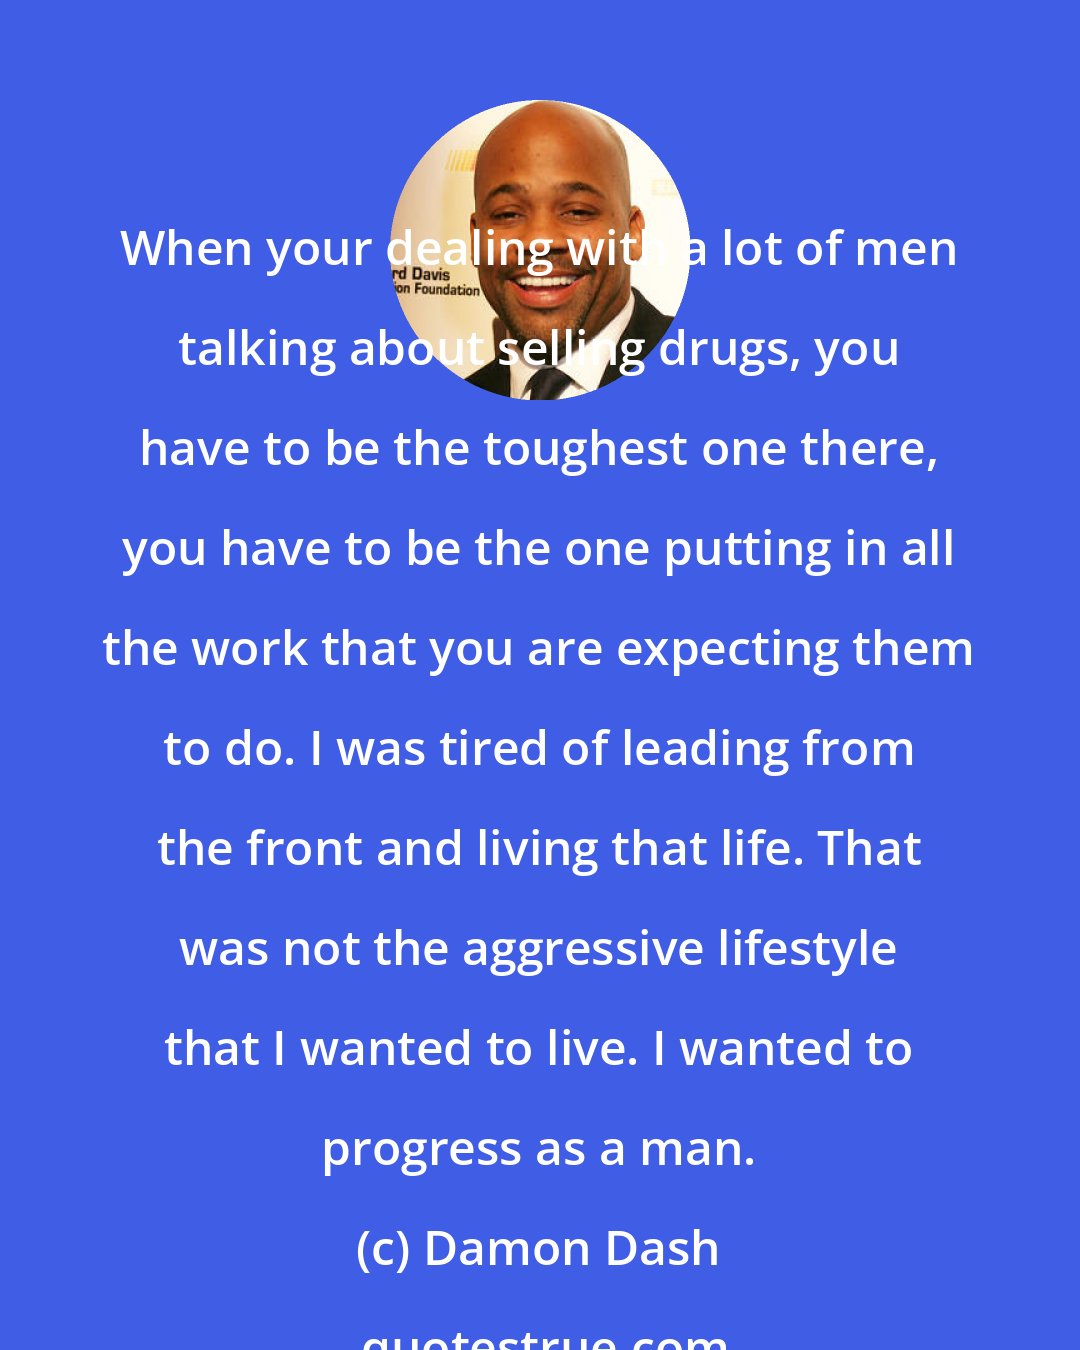 Damon Dash: When your dealing with a lot of men talking about selling drugs, you have to be the toughest one there, you have to be the one putting in all the work that you are expecting them to do. I was tired of leading from the front and living that life. That was not the aggressive lifestyle that I wanted to live. I wanted to progress as a man.